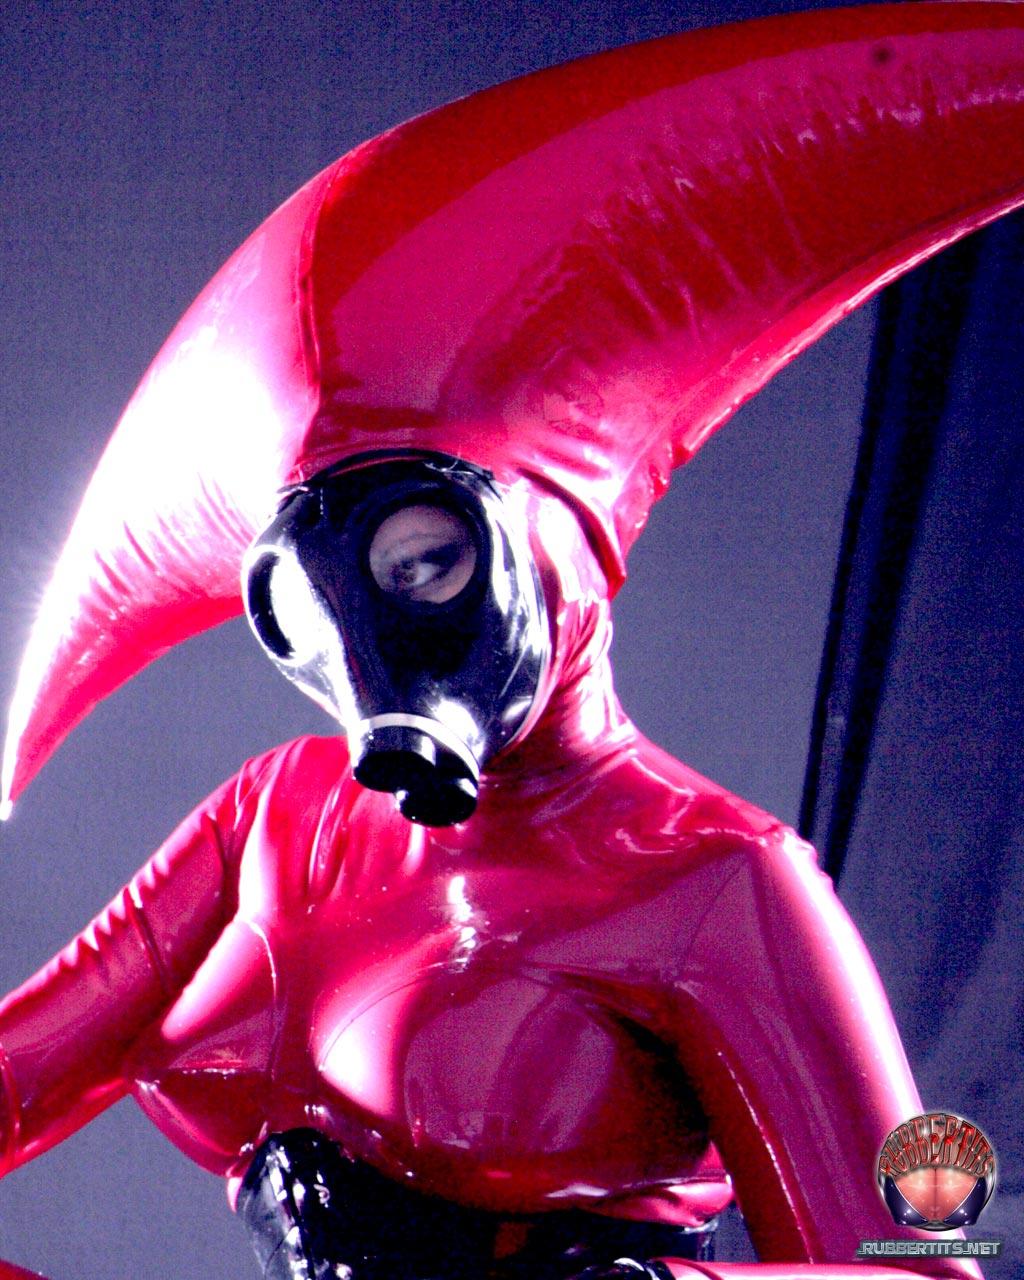 Lesbians Darkwing Zero & Lady Cassandra wear latex costumes during SFW play porn photo #422975545 | Rubber Tits Pics, Darkwing Zero, Lady Cassandra, Latex, mobile porn